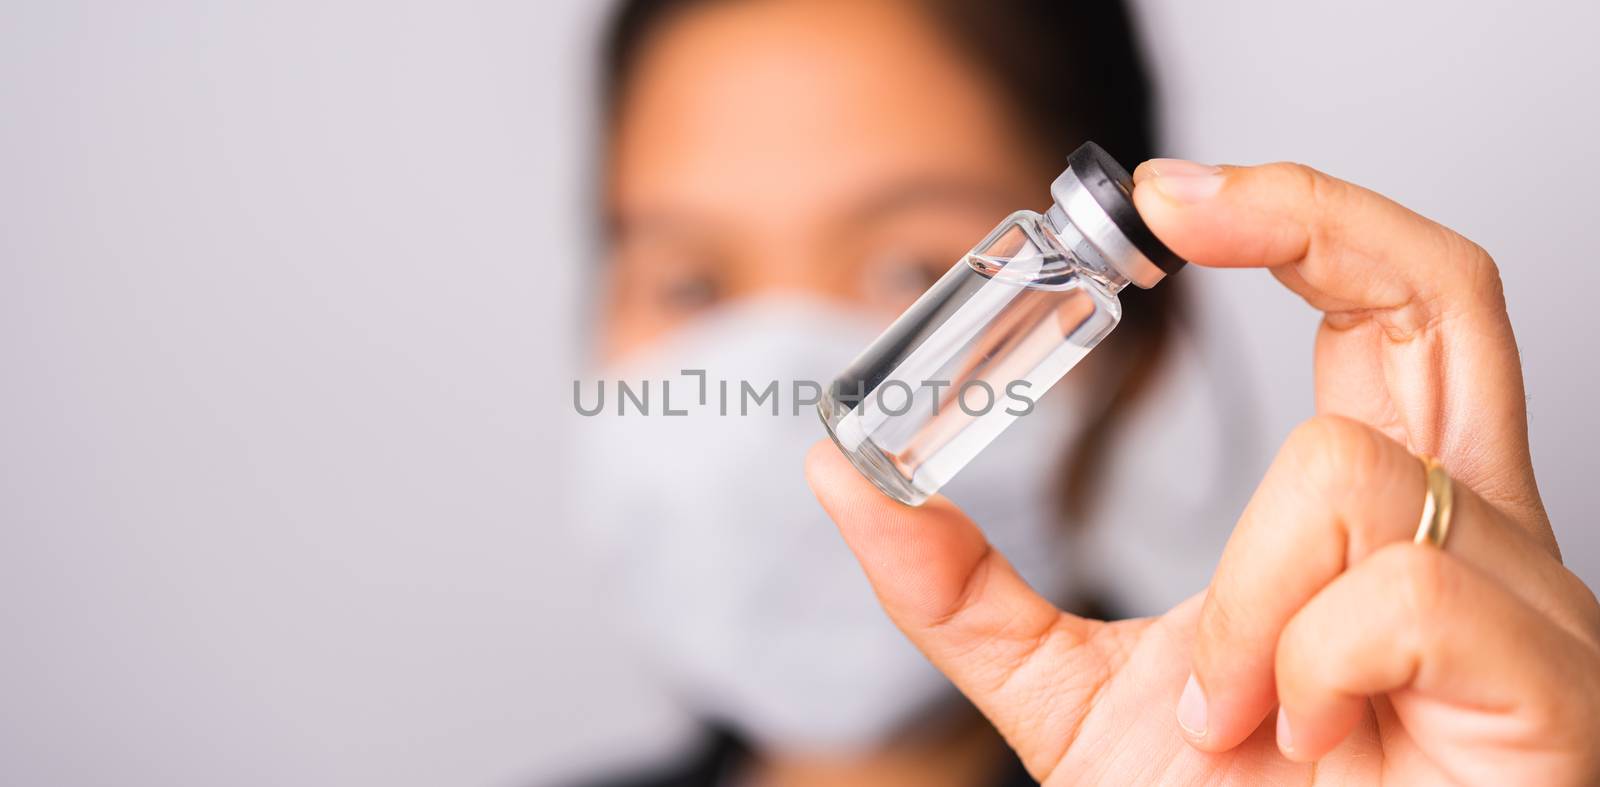 Asian woman doctor wearing surgical protective cloth face mask against coronavirus her hold ampoule bottle vaccine focus on  glass transparent, studio shot isolated white background, COVID-19 concept